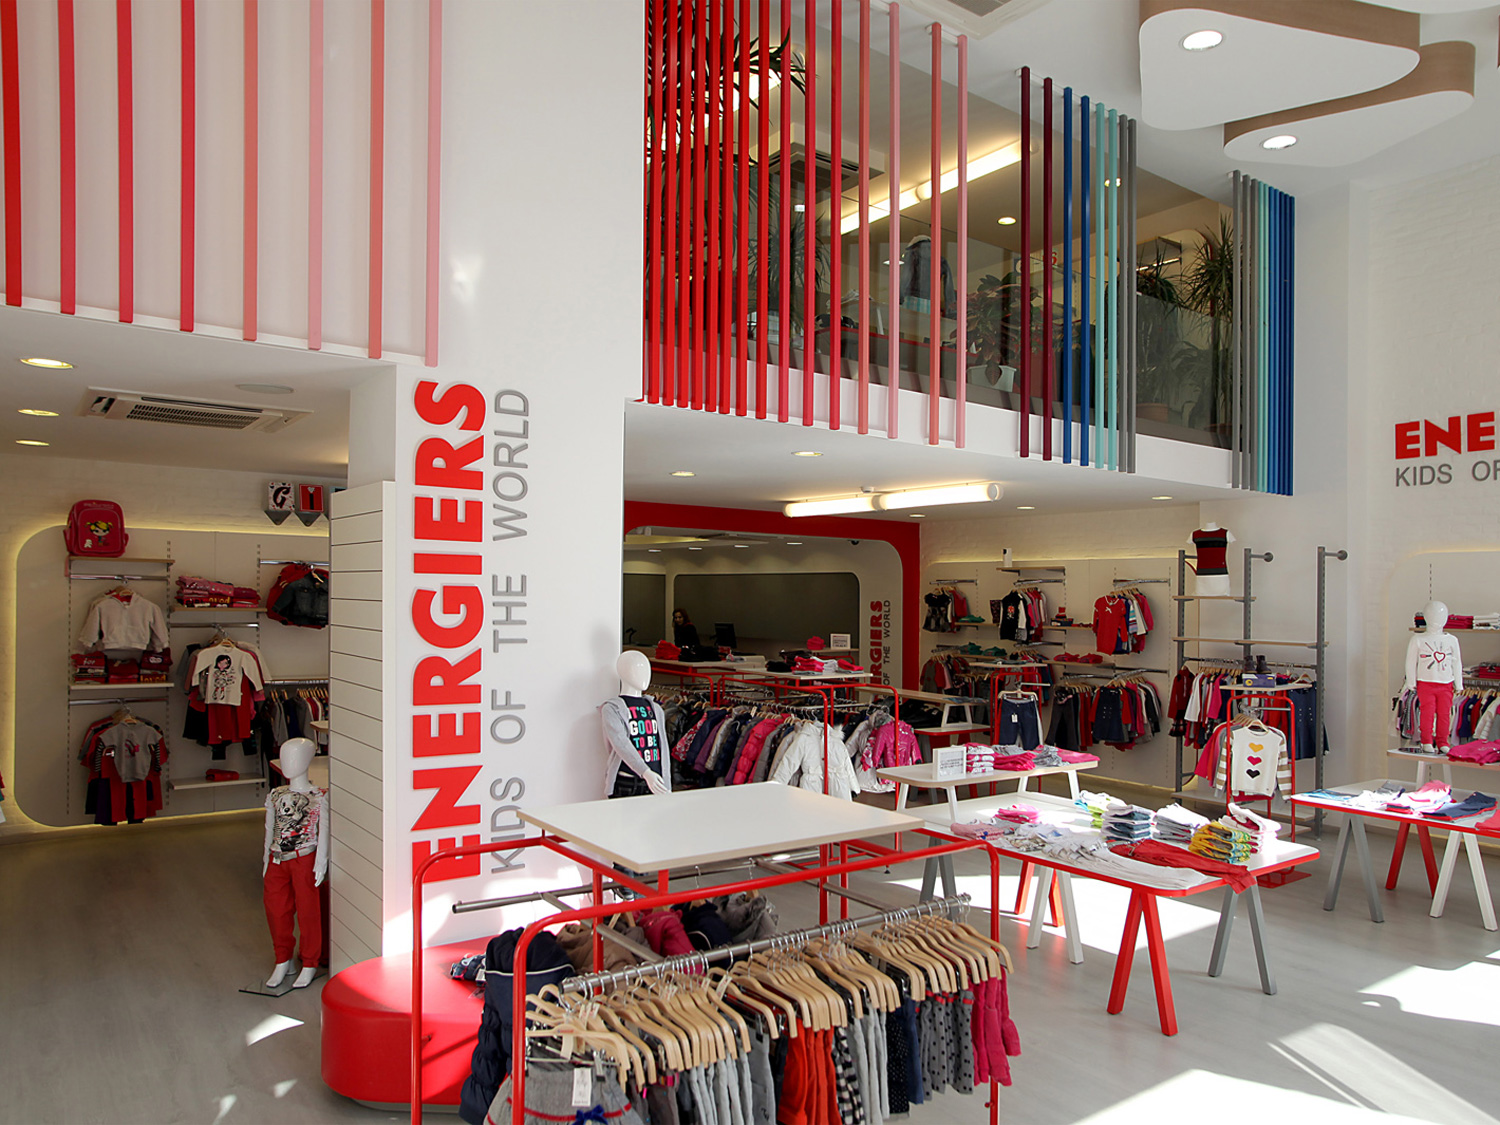 ENERGIERS-CONCEPT-STORE-1_1500x1125